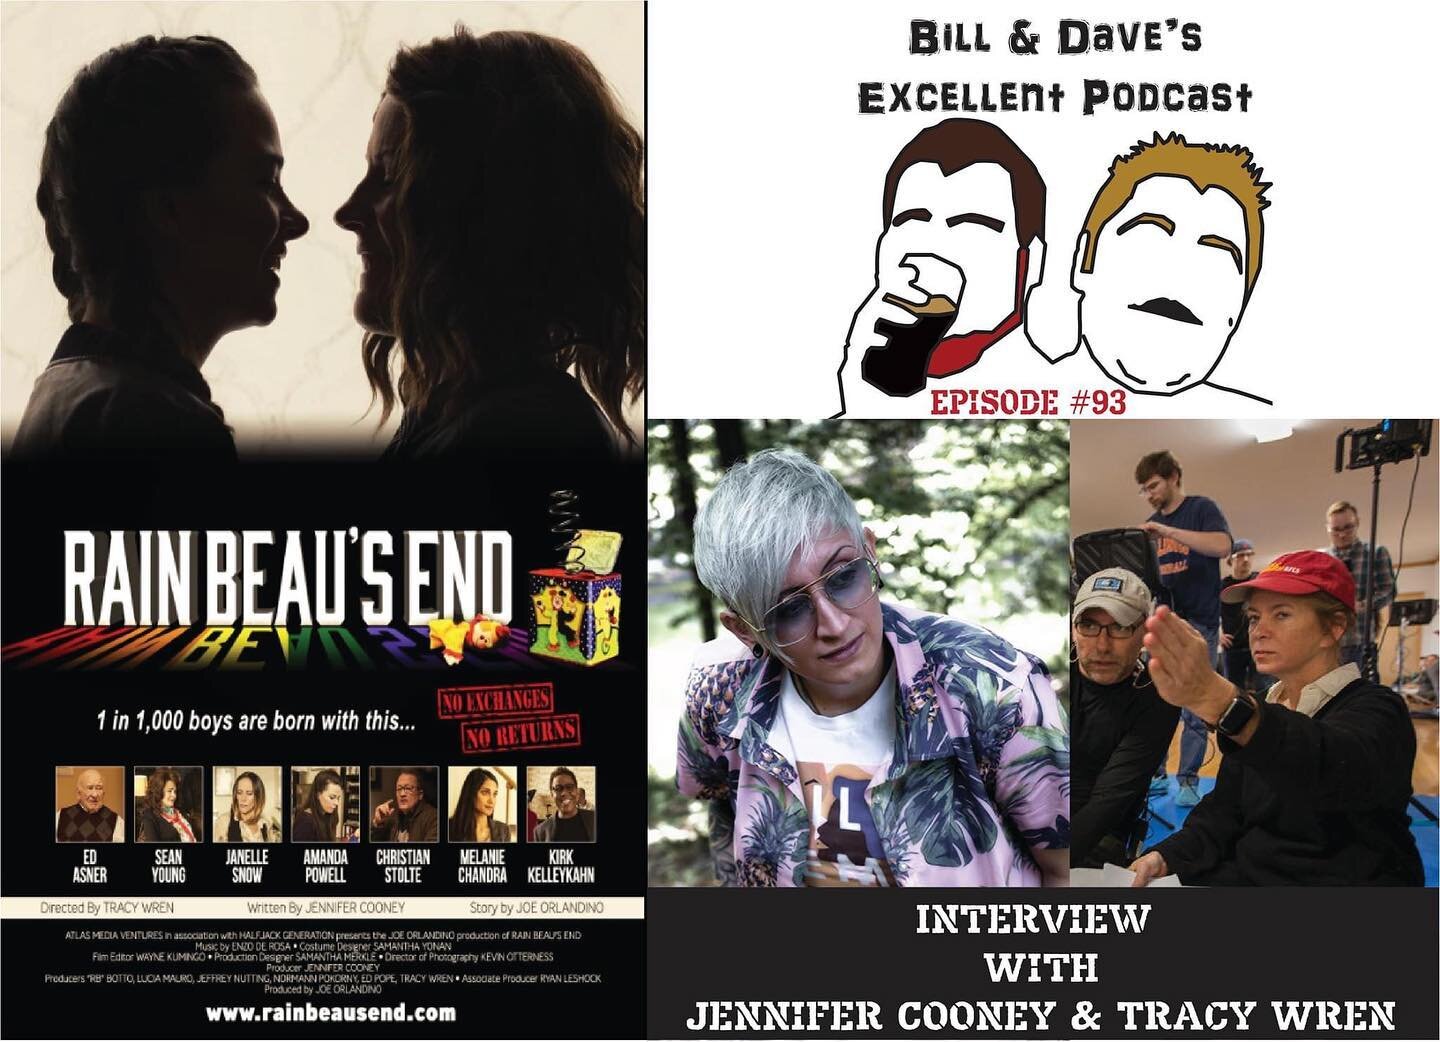 EP93 is up wherever you get your #podcasts

&ldquo;Rain Beau&rsquo;s End&rdquo; #writer Jennifer Cooney and #director Tracy Wren drop in to discuss their new film.  We talk about the amazing cast like Sean Young, Ed Asner, Christian Stolte, filming i